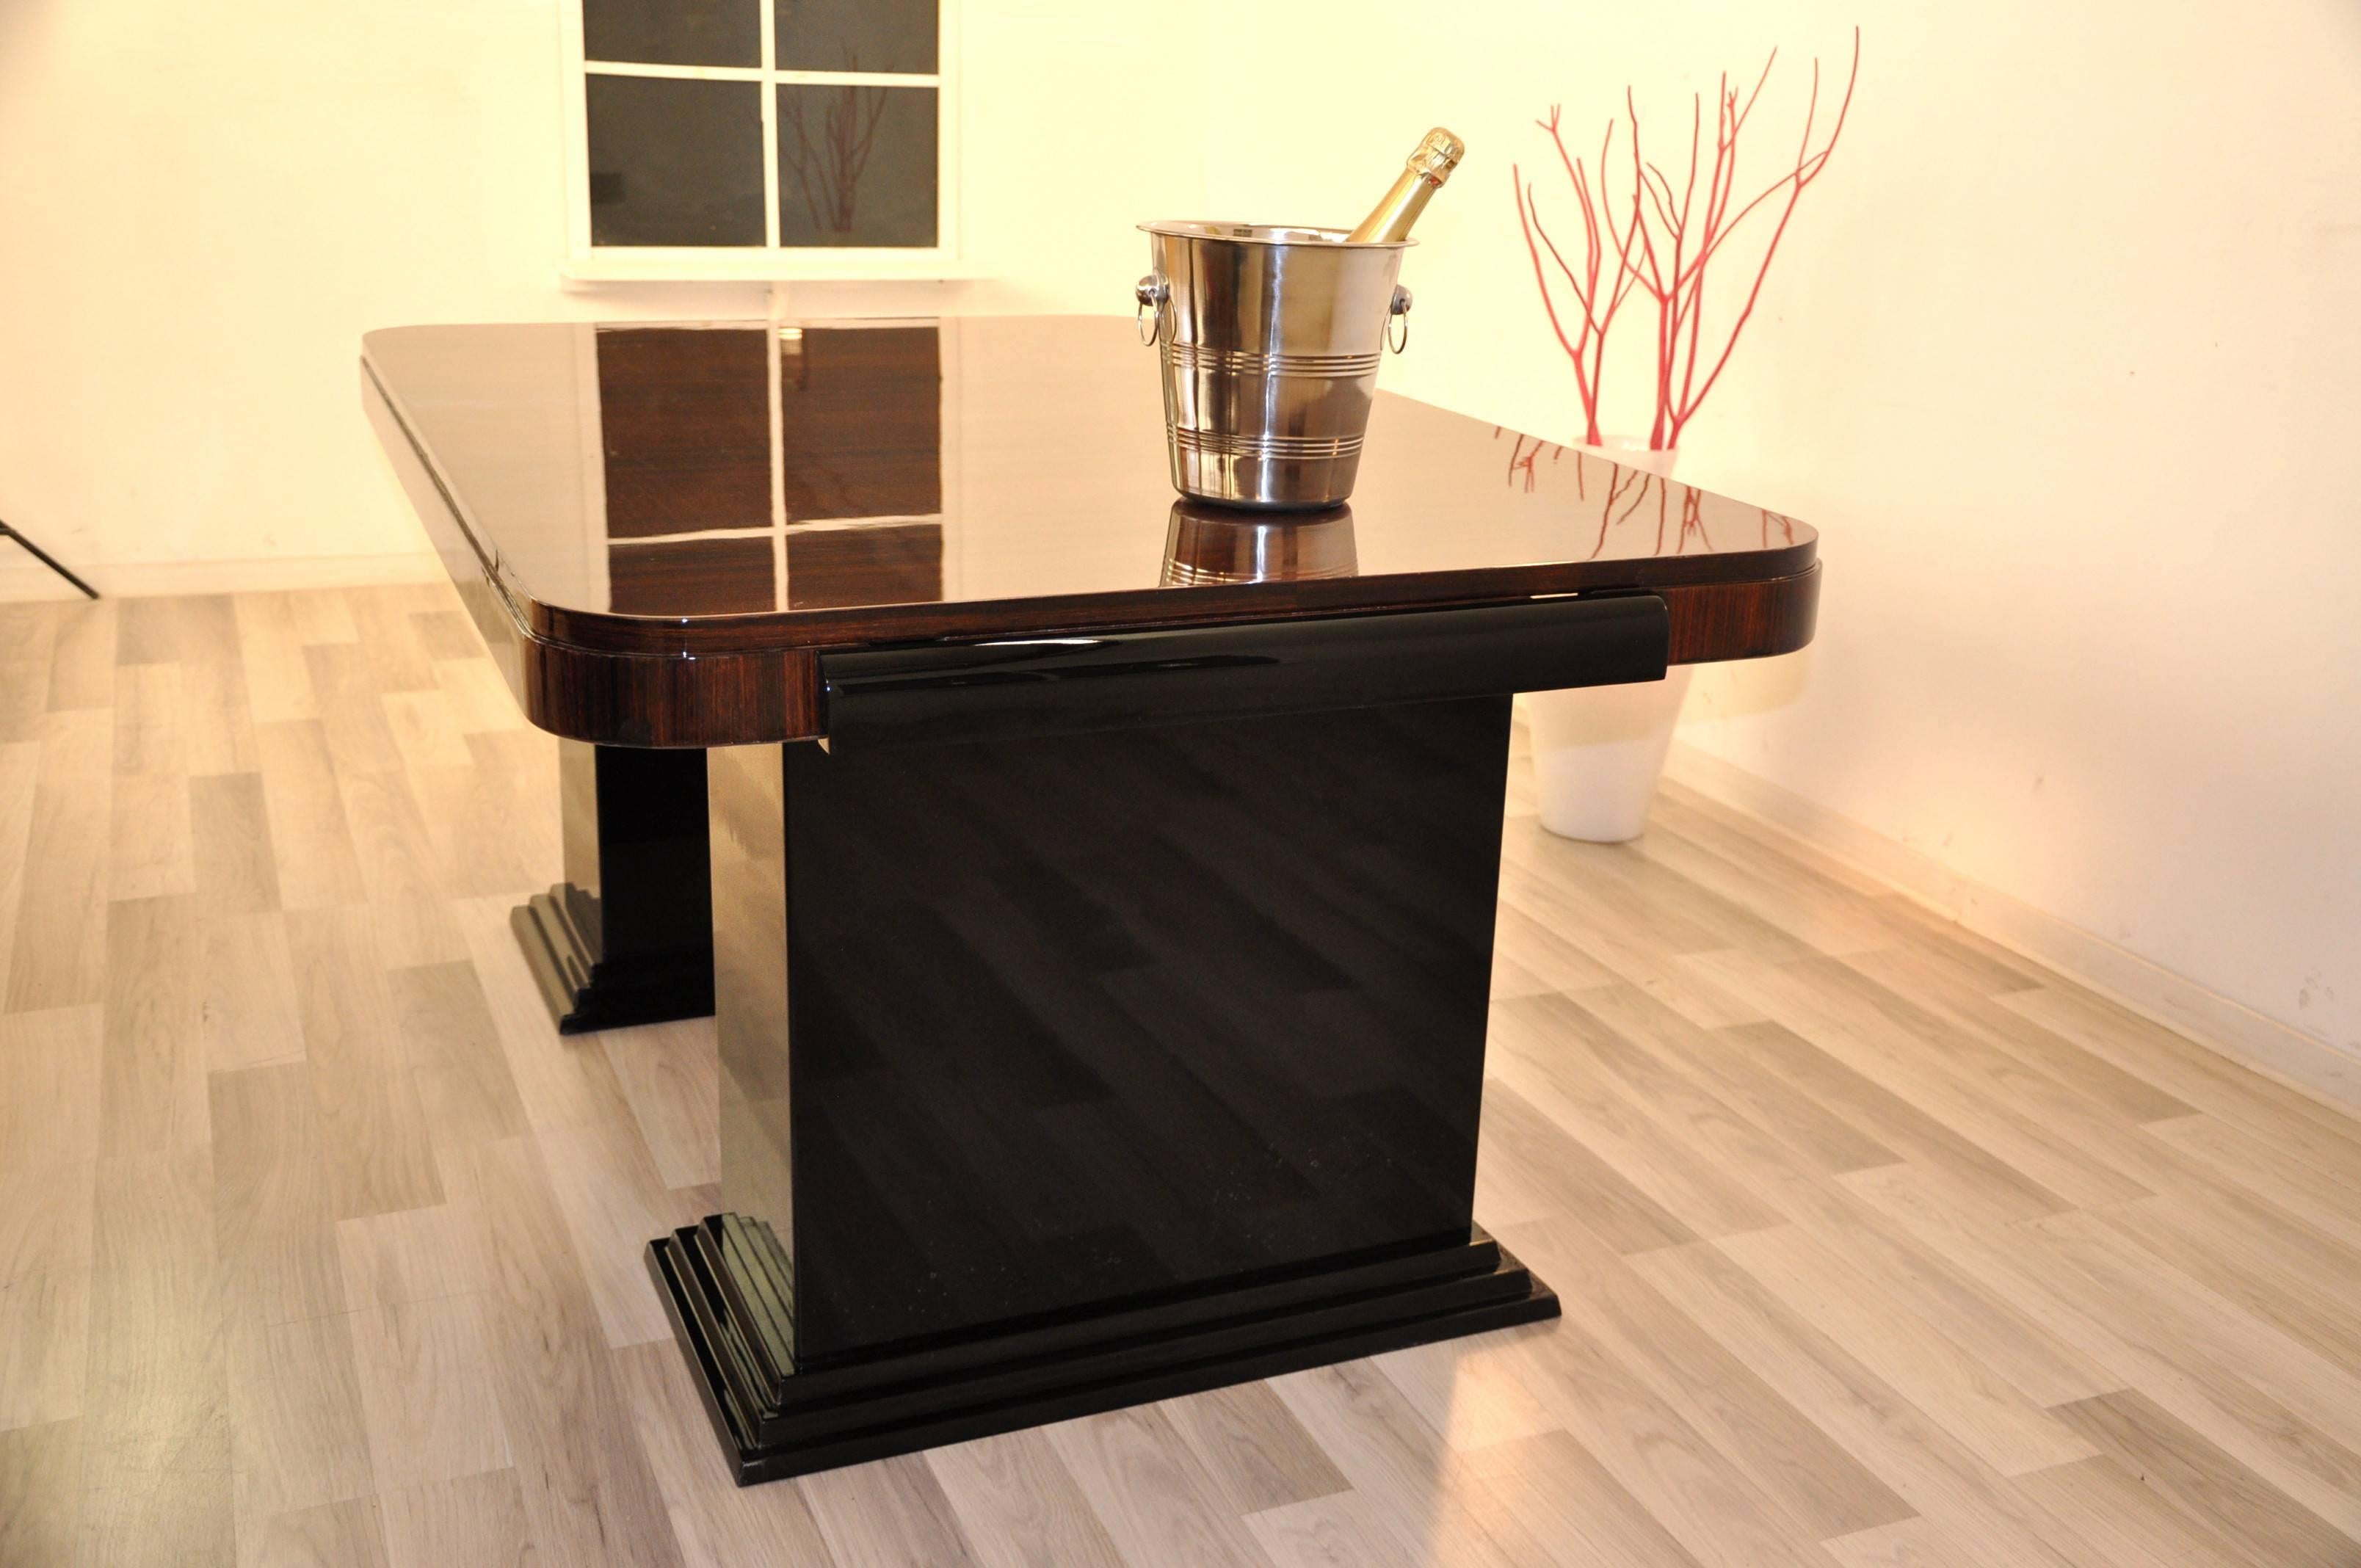 Art Deco lady's desk with a beautiful Macassar tabletop. Elegant design with black legs with pyramid feet and a hand polished finish. The tabletop offers a great Macassar veneer with a gorgeous and unique grain.

 Luxurious design with rounded